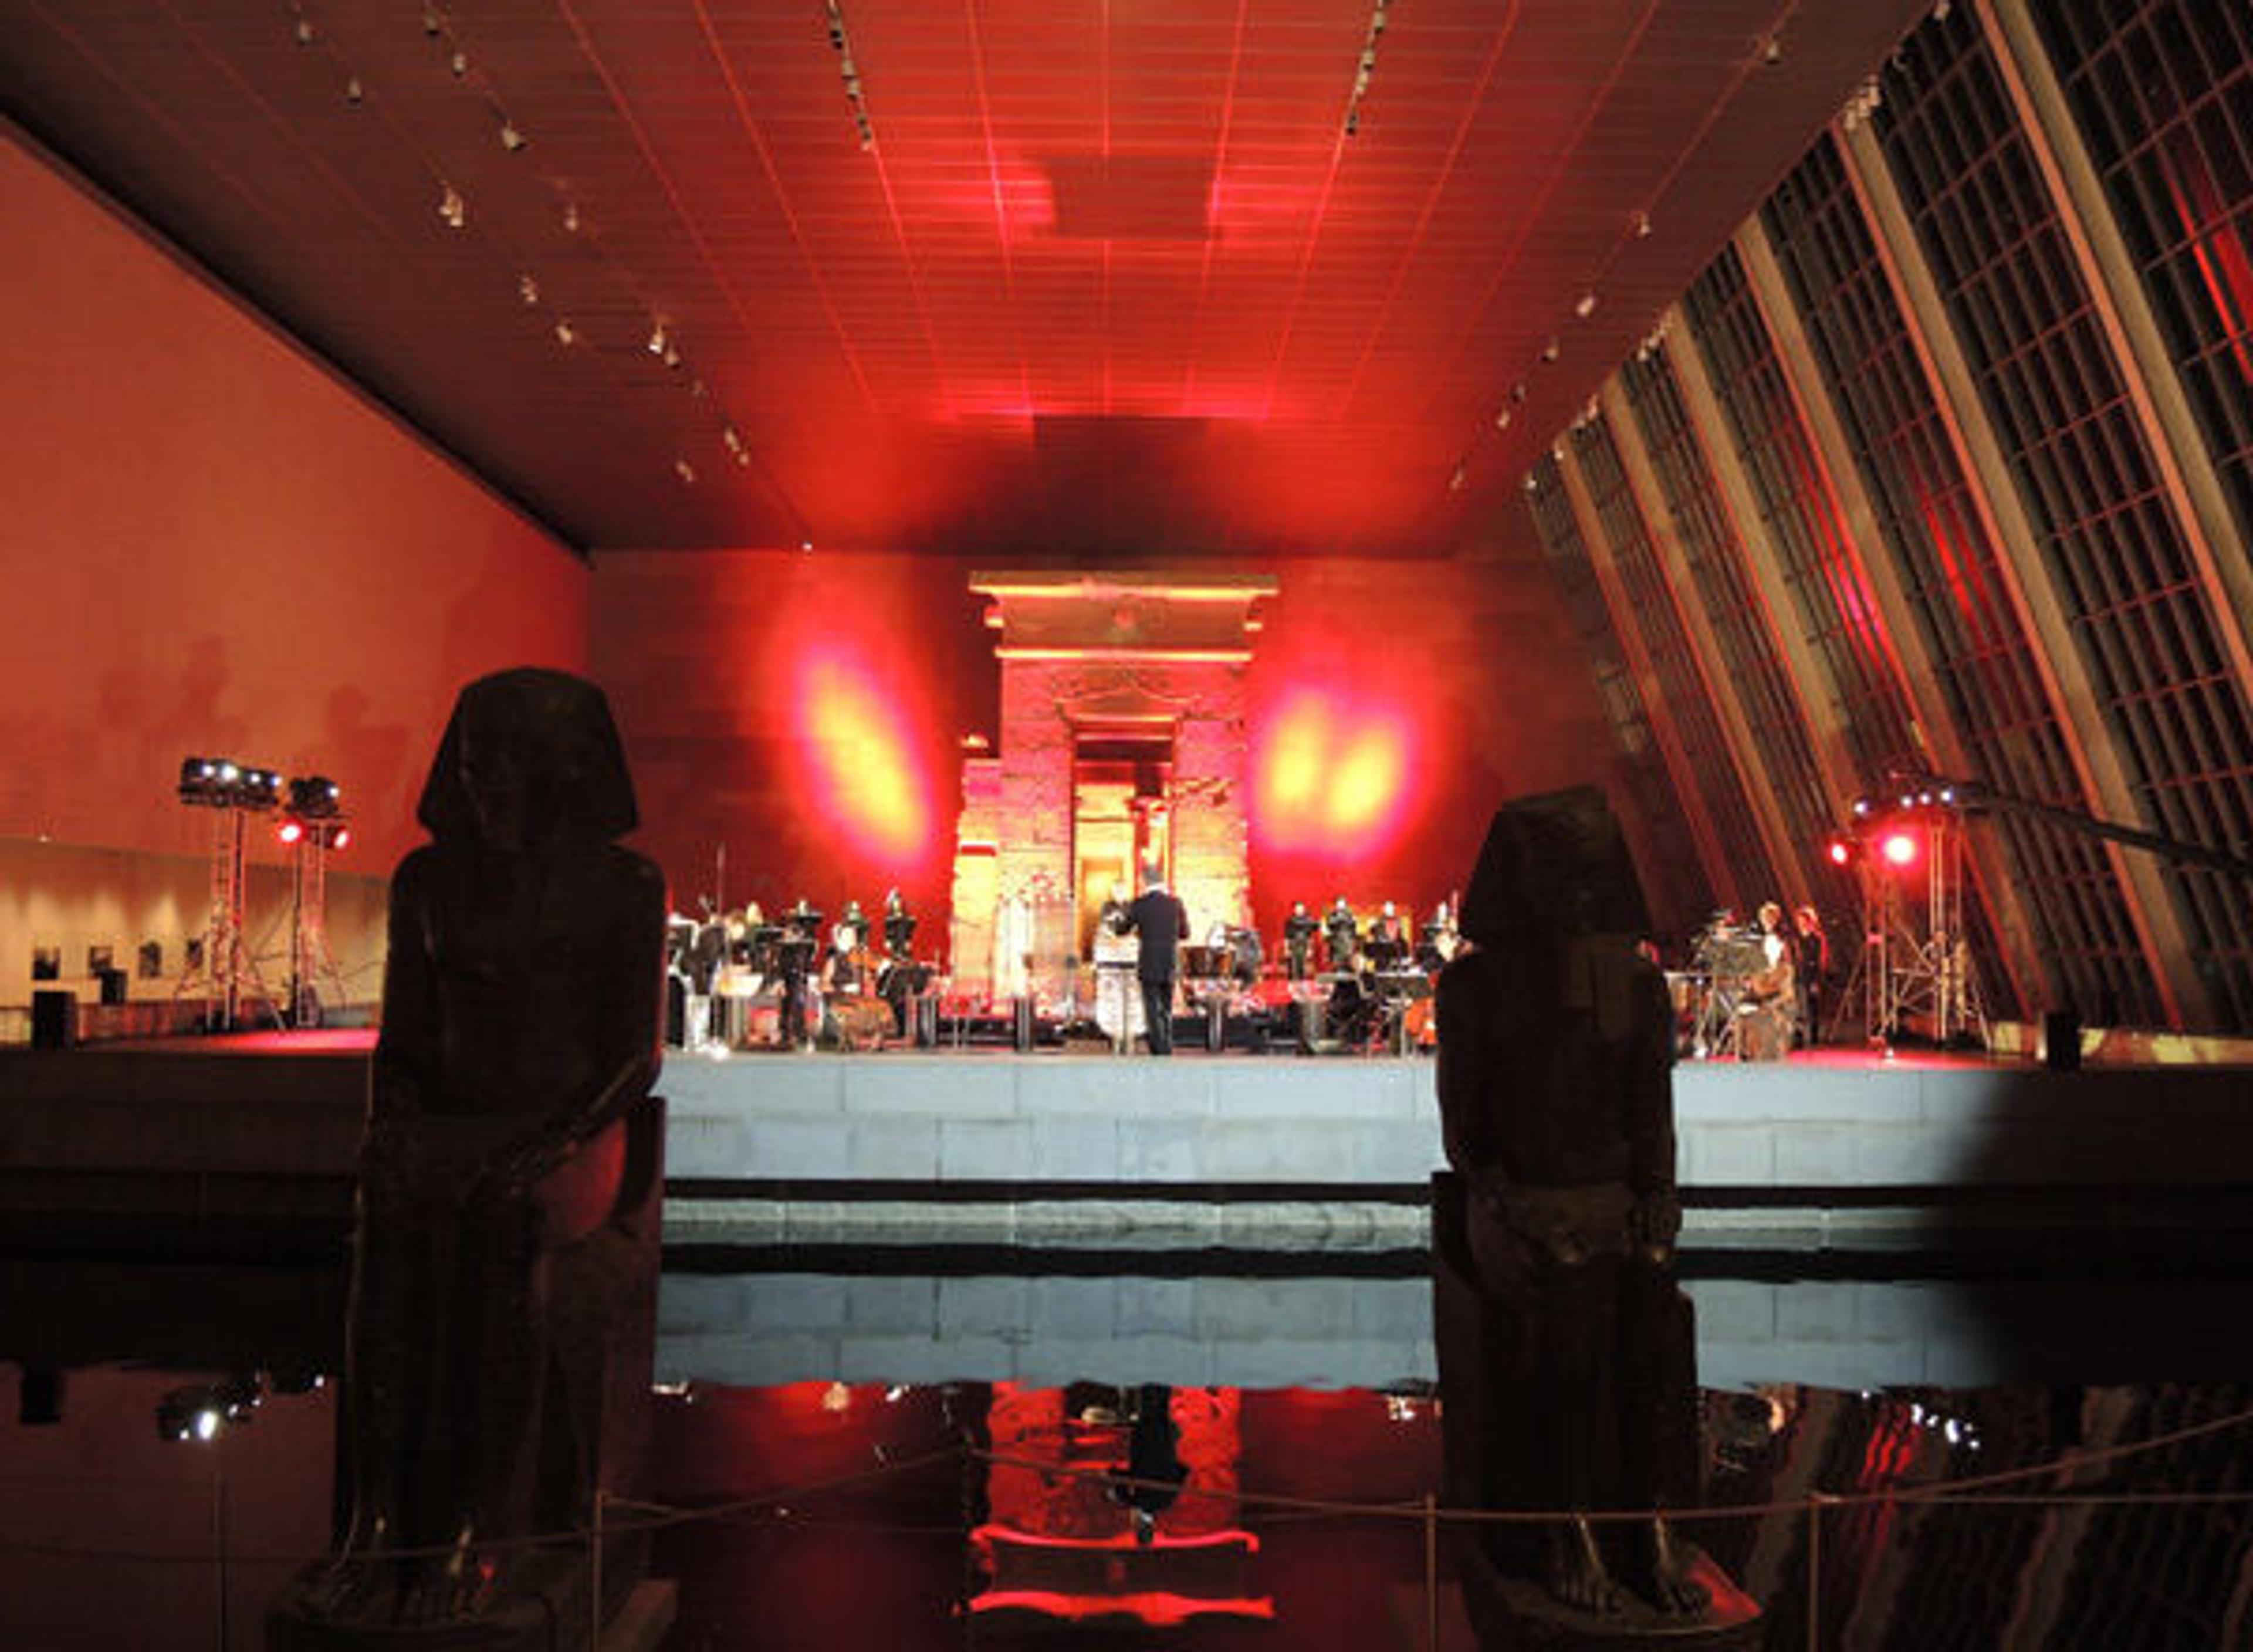 Tan Dun's Water Passion performed in The Temple of Dendur in The Sackler Wing